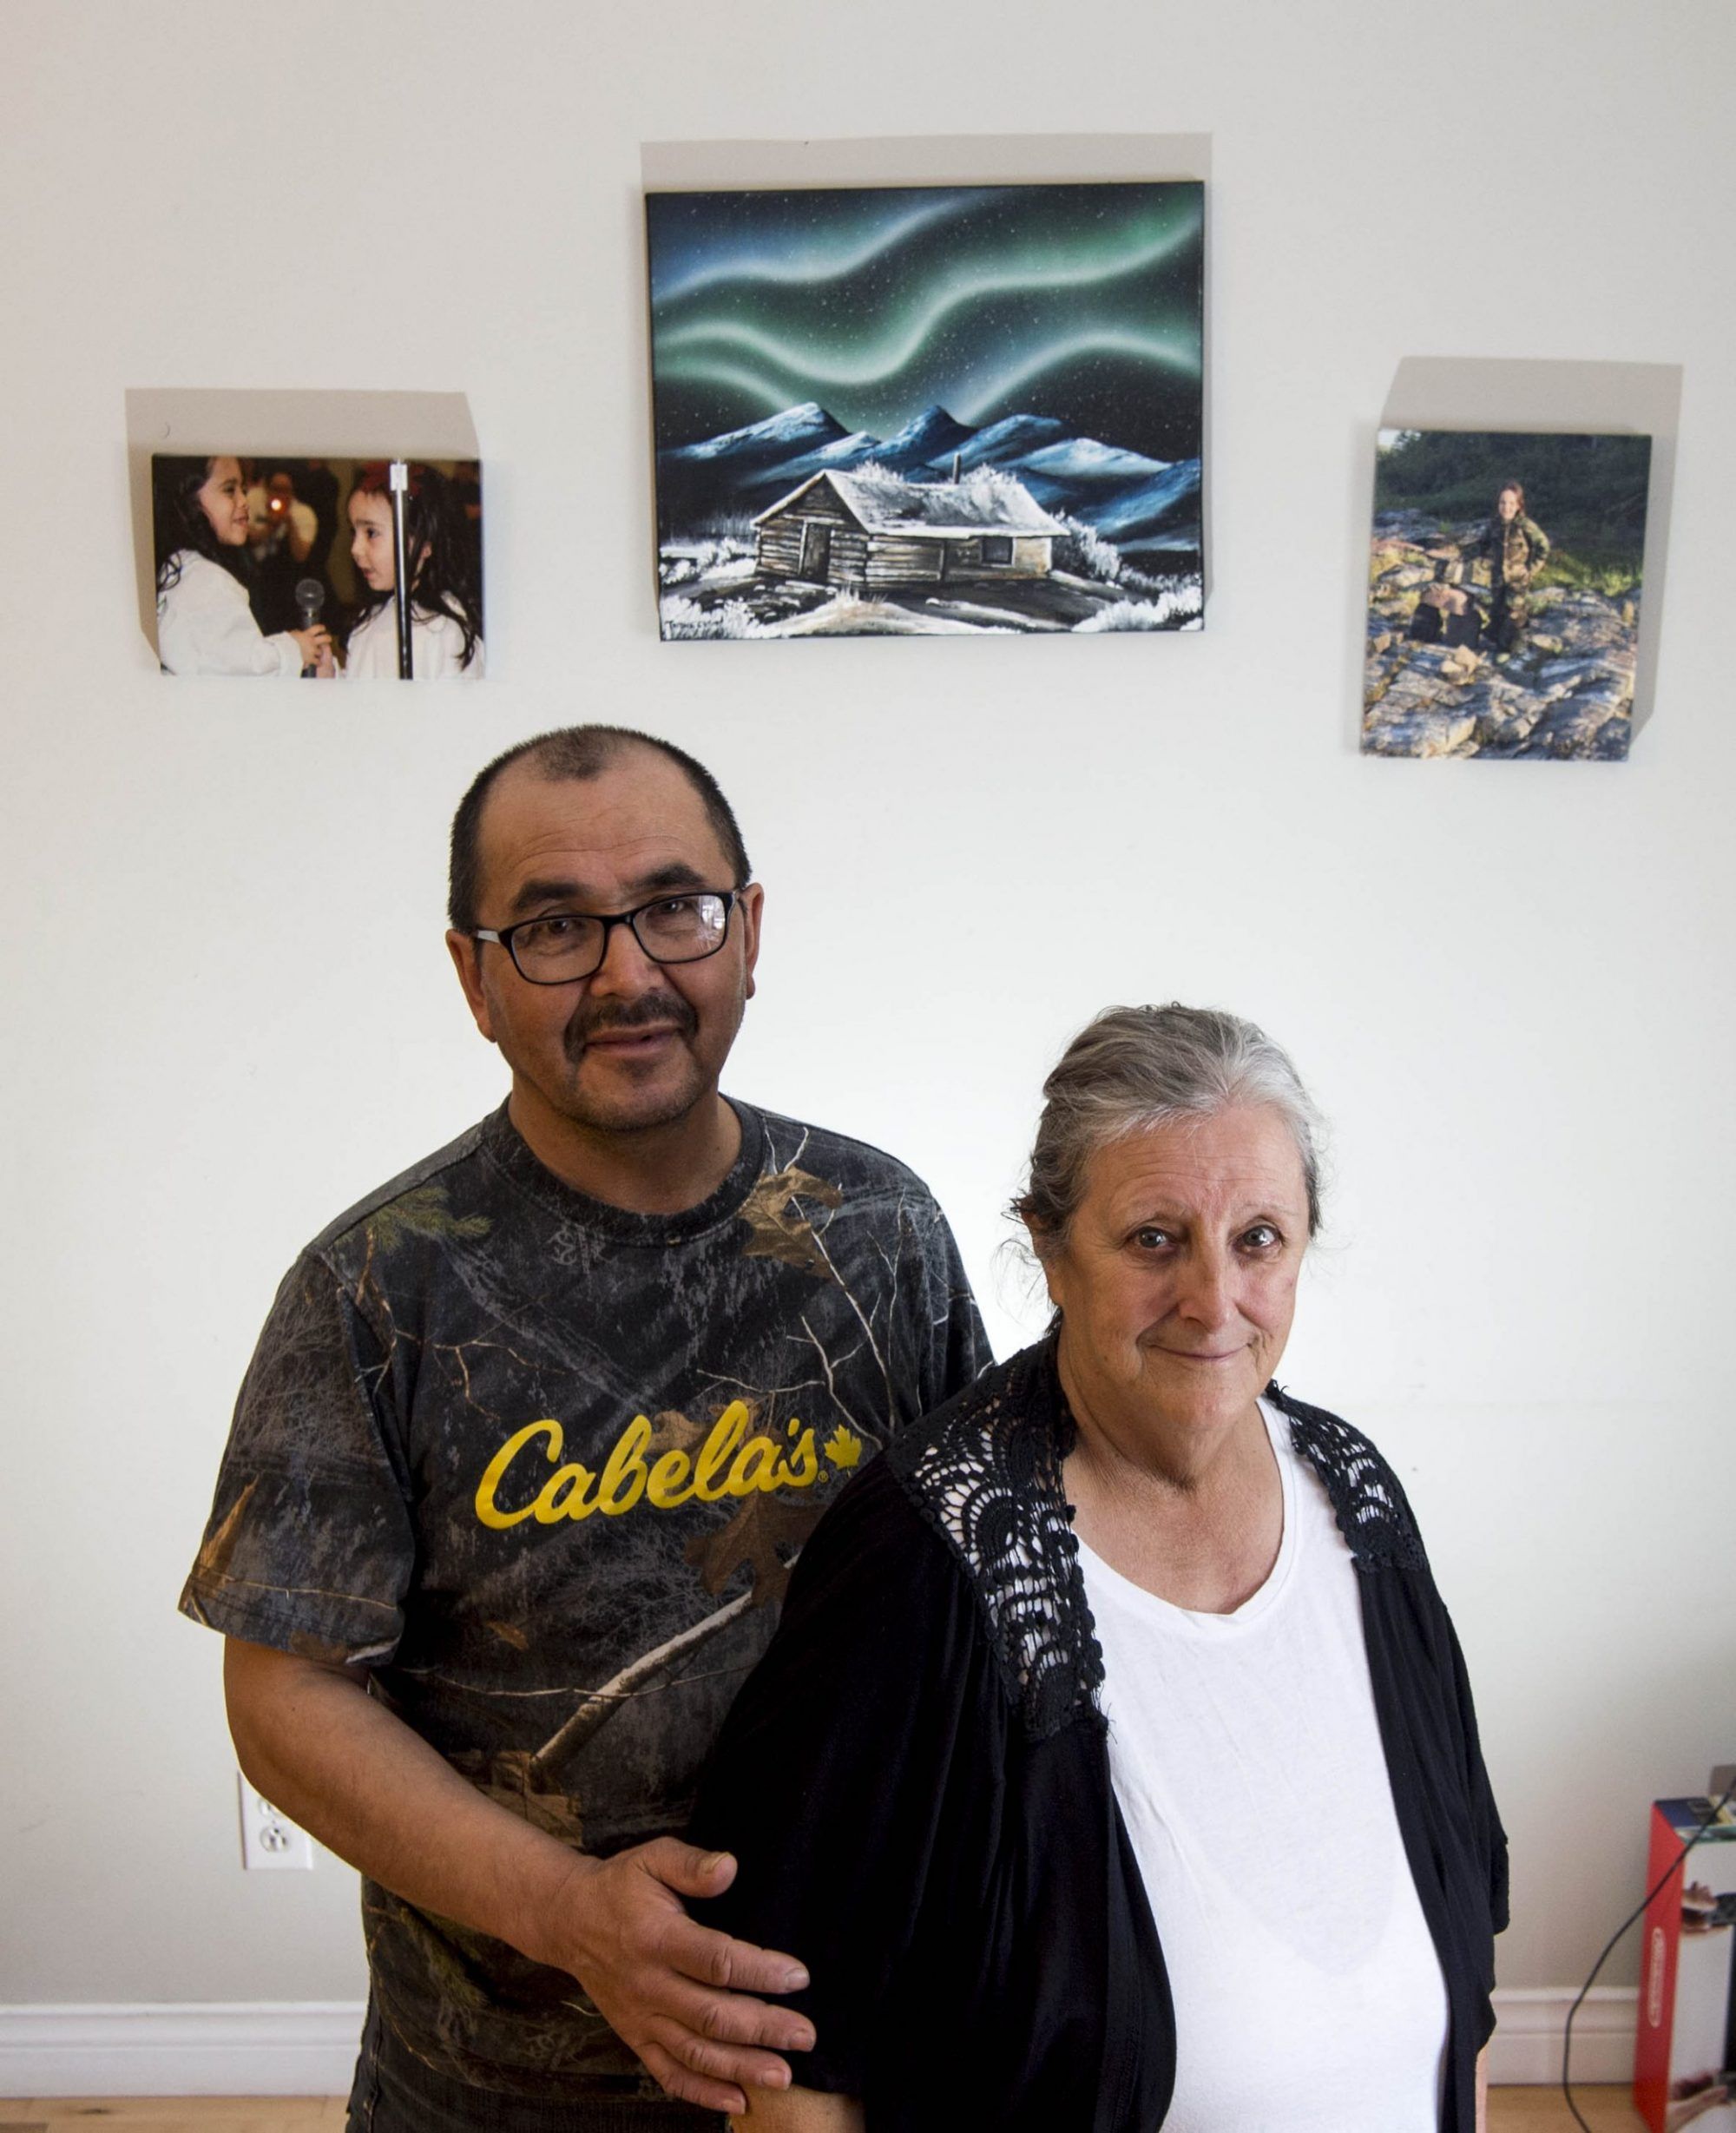 David and Charlotte Wolfrey pose for a portrait in their home in Rigolet, Labrador. Charlotte, an elder and elected leader of the small Inuit community of Rigolet, worries that methylmercury poisoning from a recently completed hydropower project will destroy the community's deep cultural connection to seals and other wild-caught food. Image by Michael Seamans / The Weather Channel. Canada, 2019.

